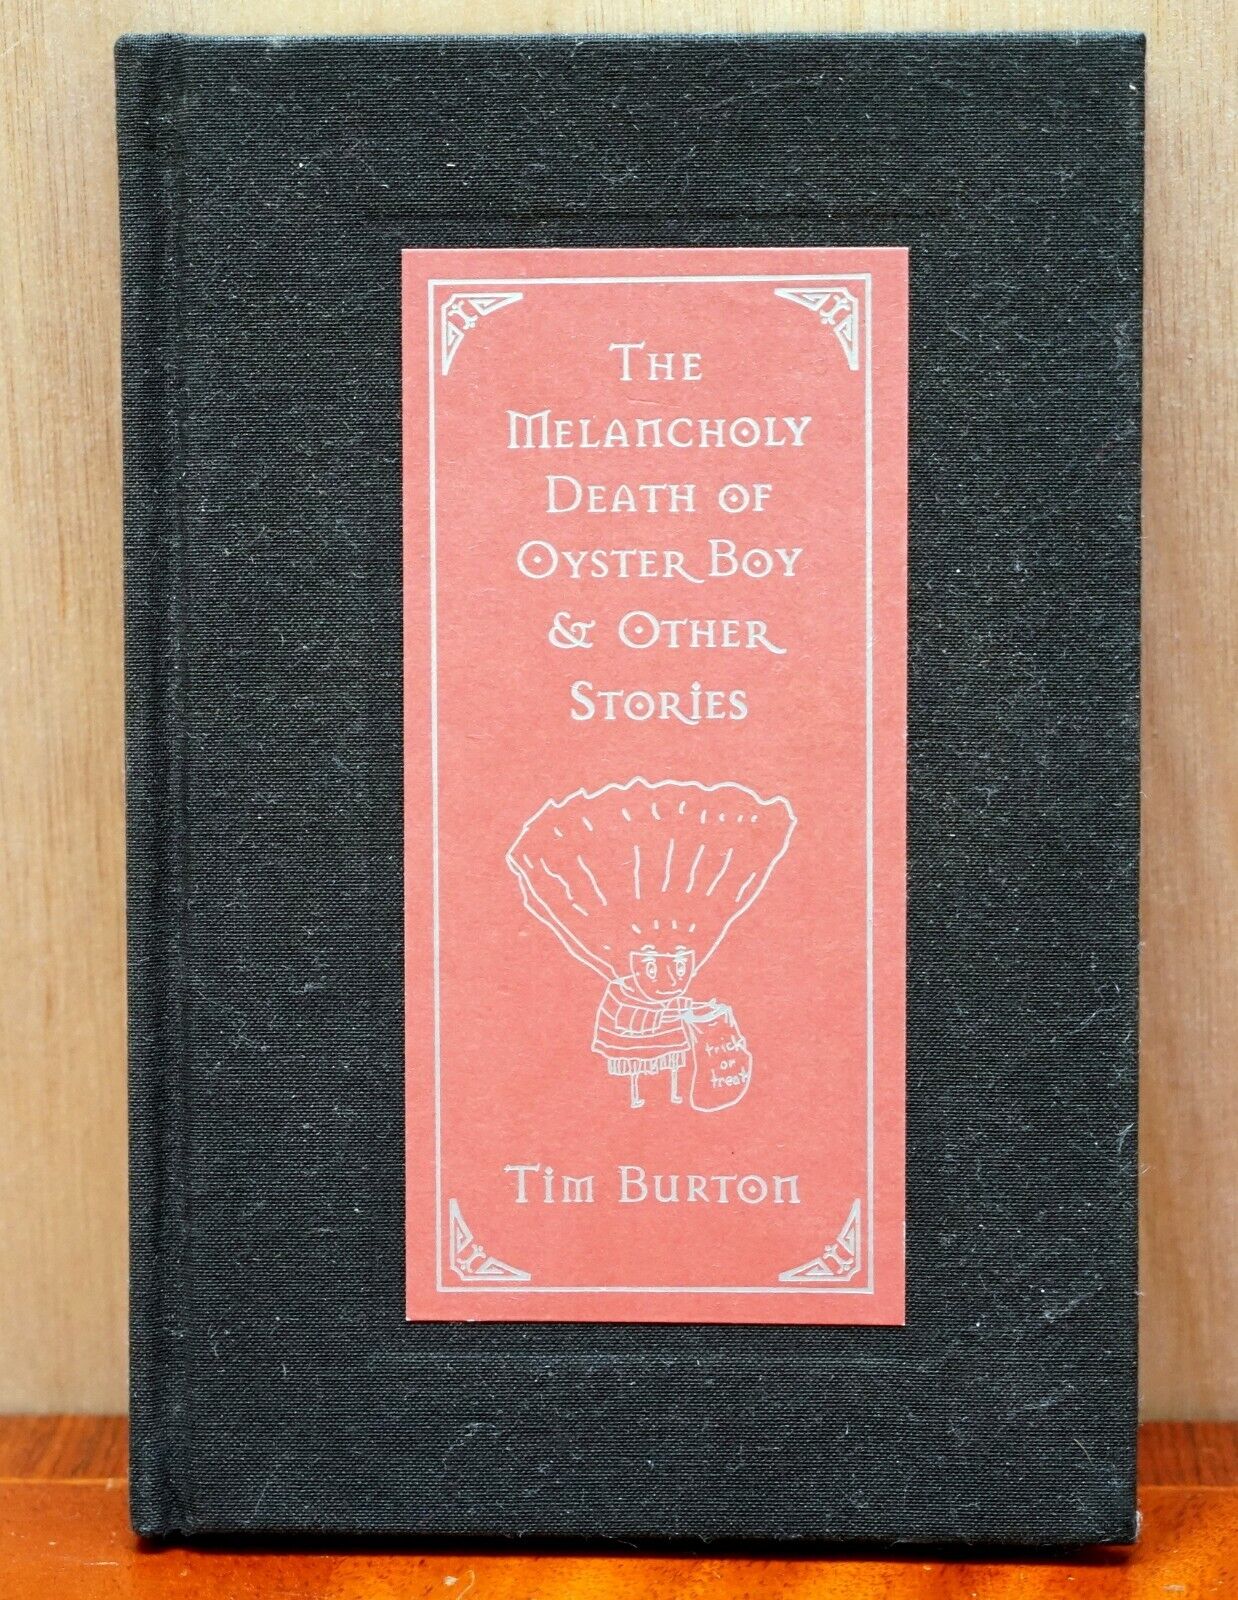 1997 FIRST EDITION THE MELANCHOLY DEATH OF OYSTER BOY & OTHER STORIES TIM BURTON